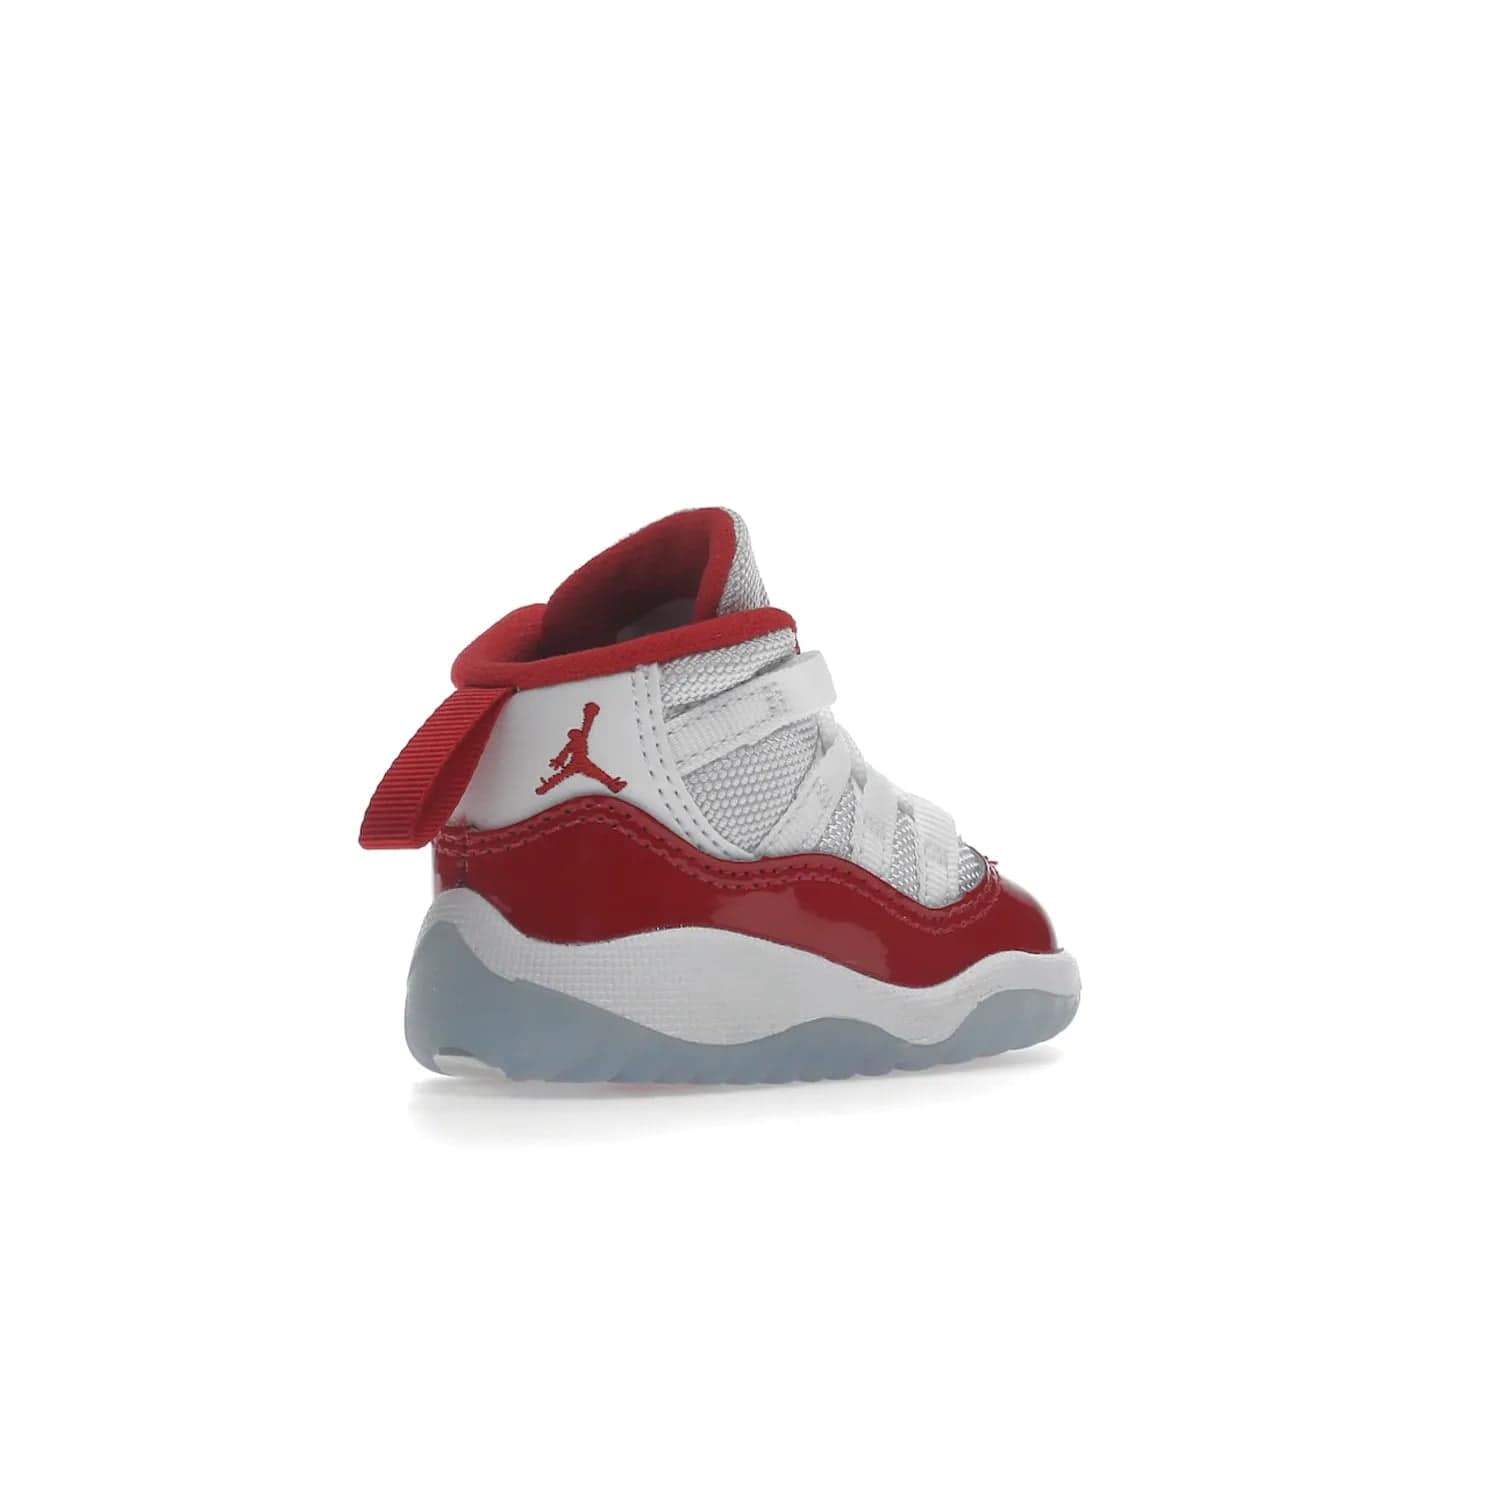 Jordan 11 Retro Cherry (2022) (TD) - Image 33 - Only at www.BallersClubKickz.com - Timeless classic. Air Jordan 11 Retro Cherry 2022 TD combines mesh, leather & suede for a unique look. White upper with varsity red suede. Jumpman logo on collar & tongue. Available Dec 10th, priced at $80.